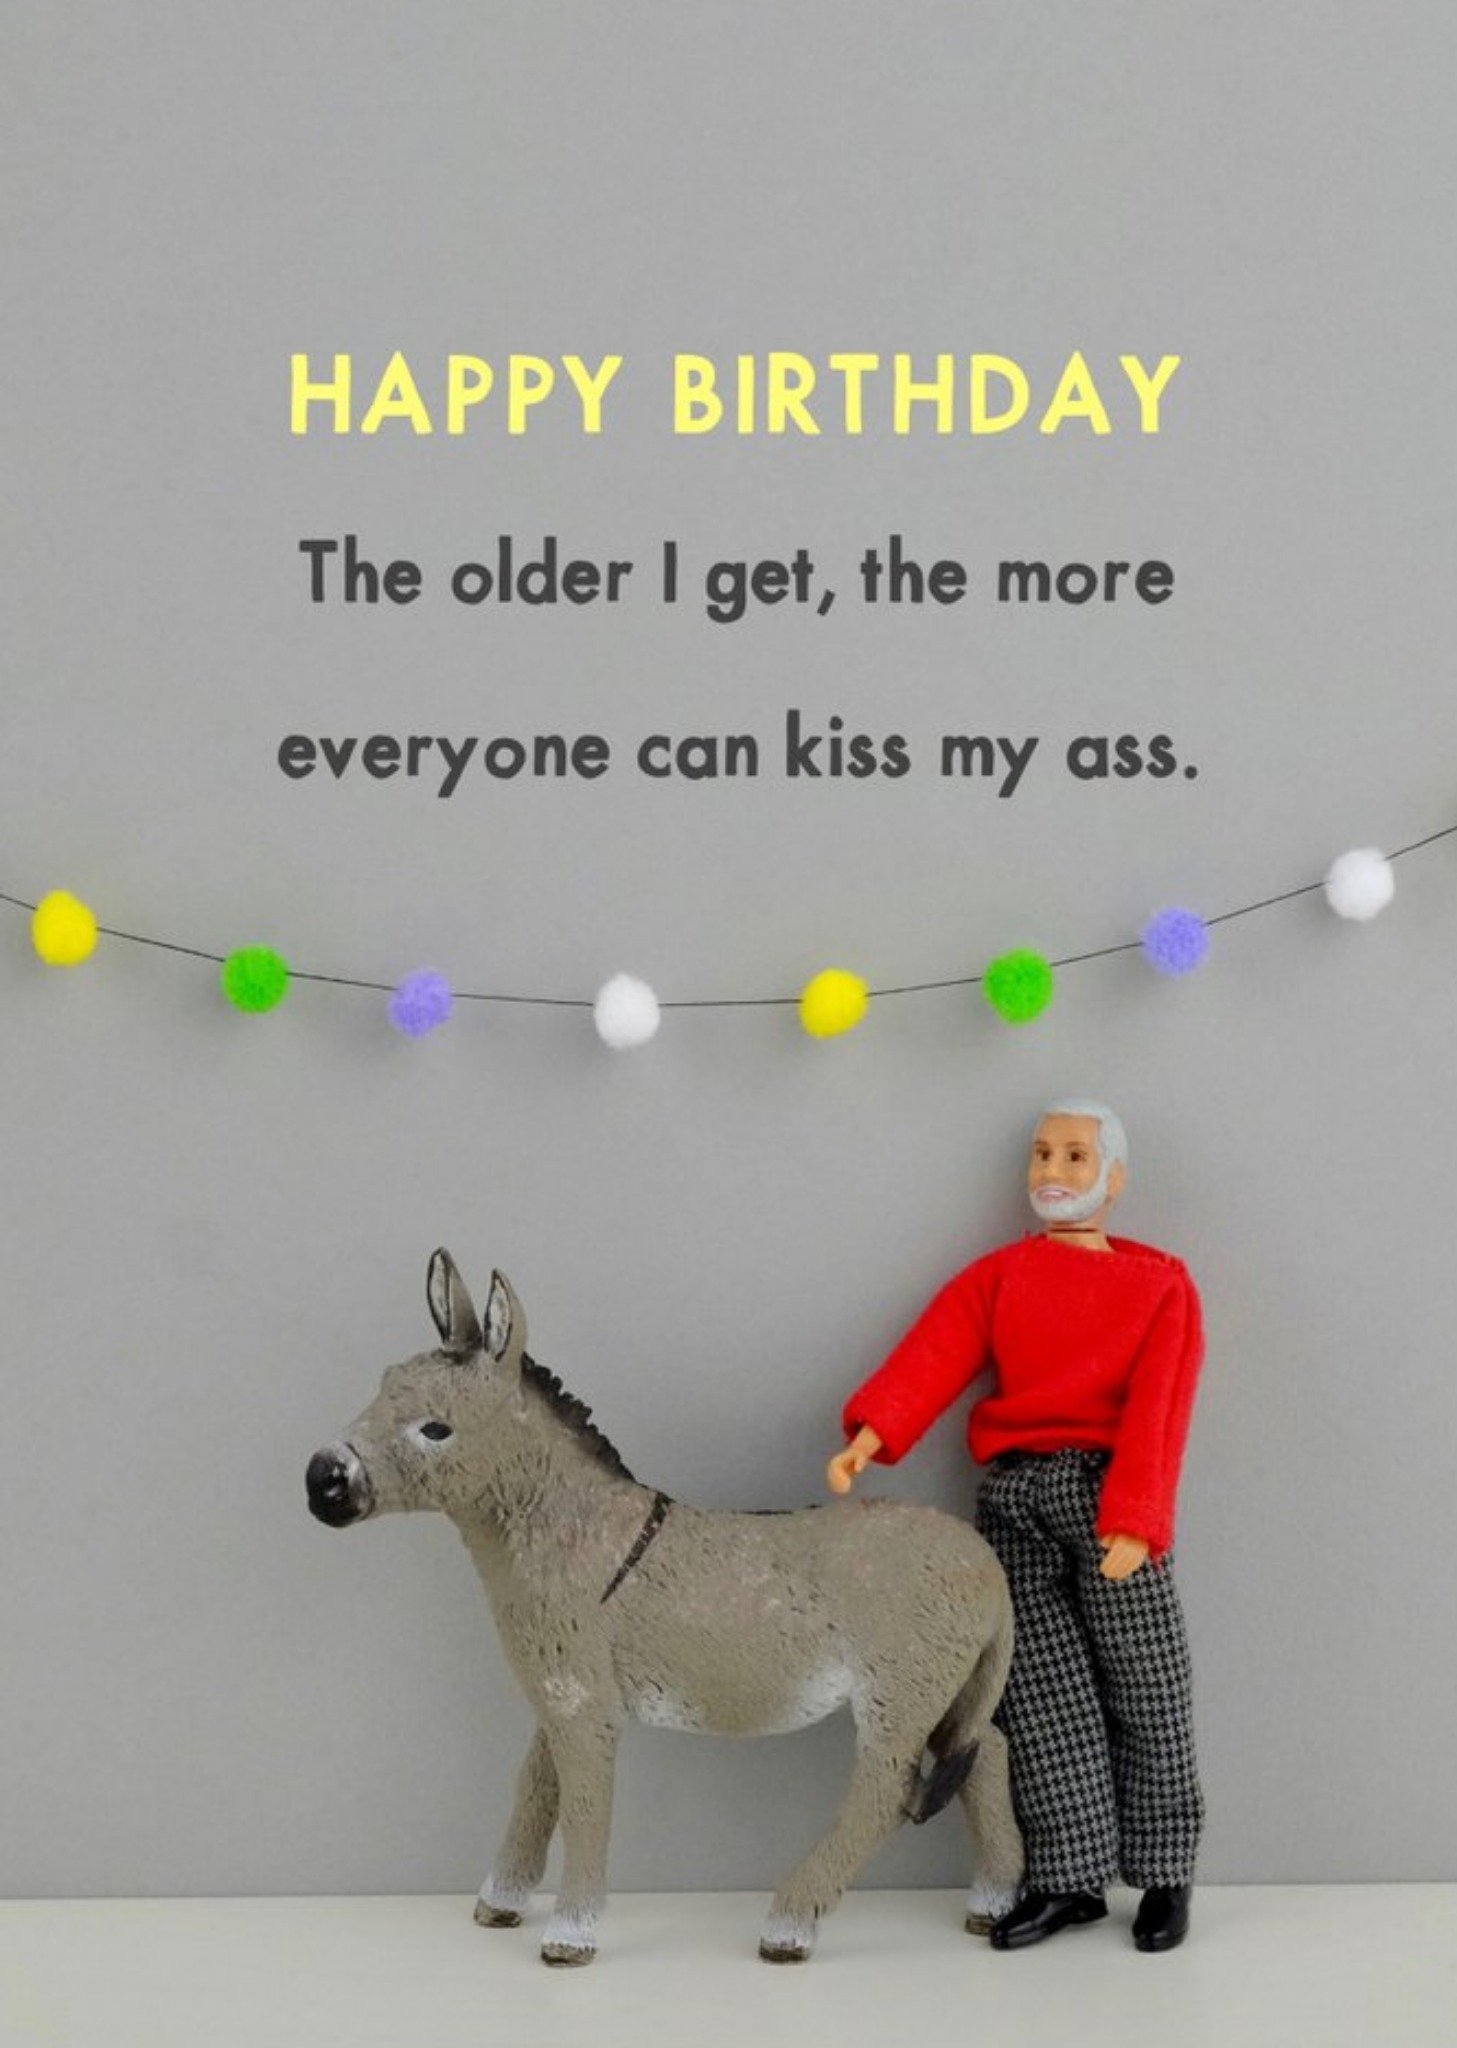 Bold And Bright Funny Dolls The Older I Get The More Everyone Can Kiss My Ass Birthday Card Ecard